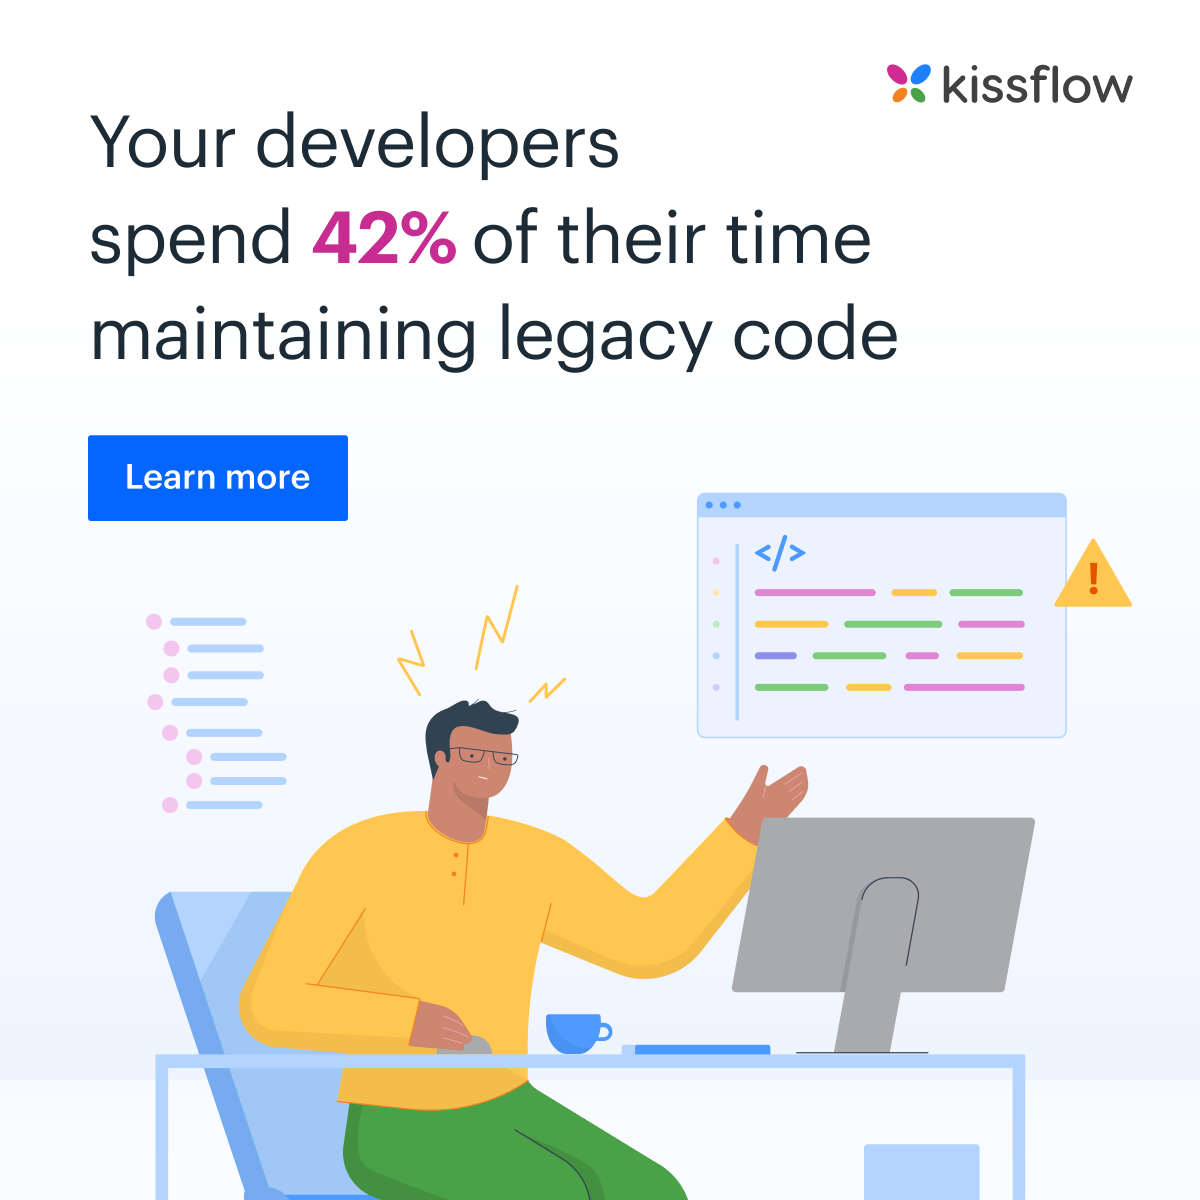 Developers spend 42% of their time maintaining legacy code